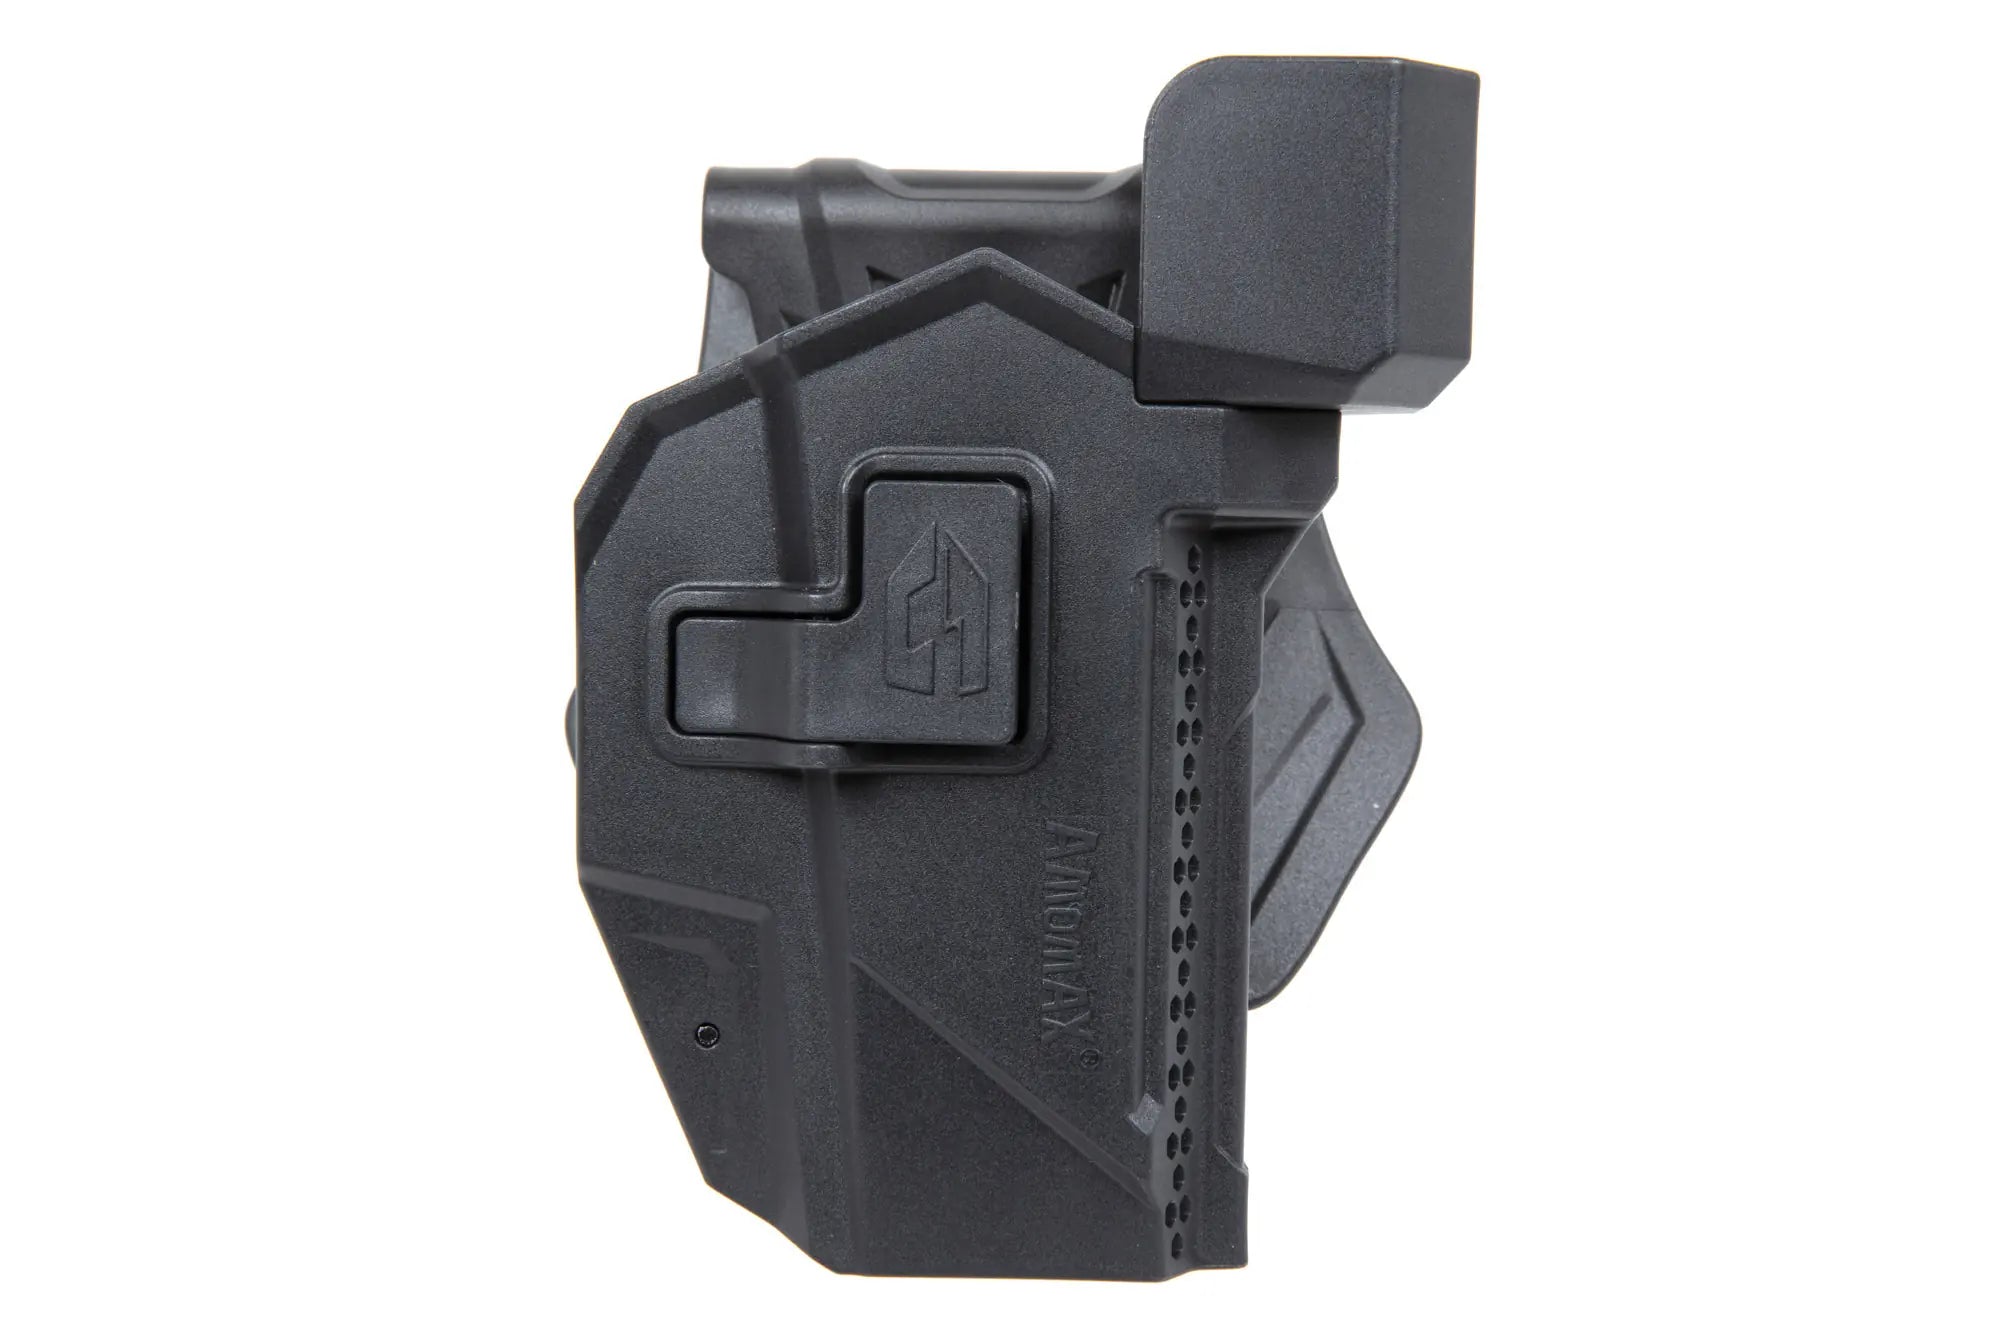 Amomax holster for Glock 19/23/32 type replicas with optics (right-handed) Black-1